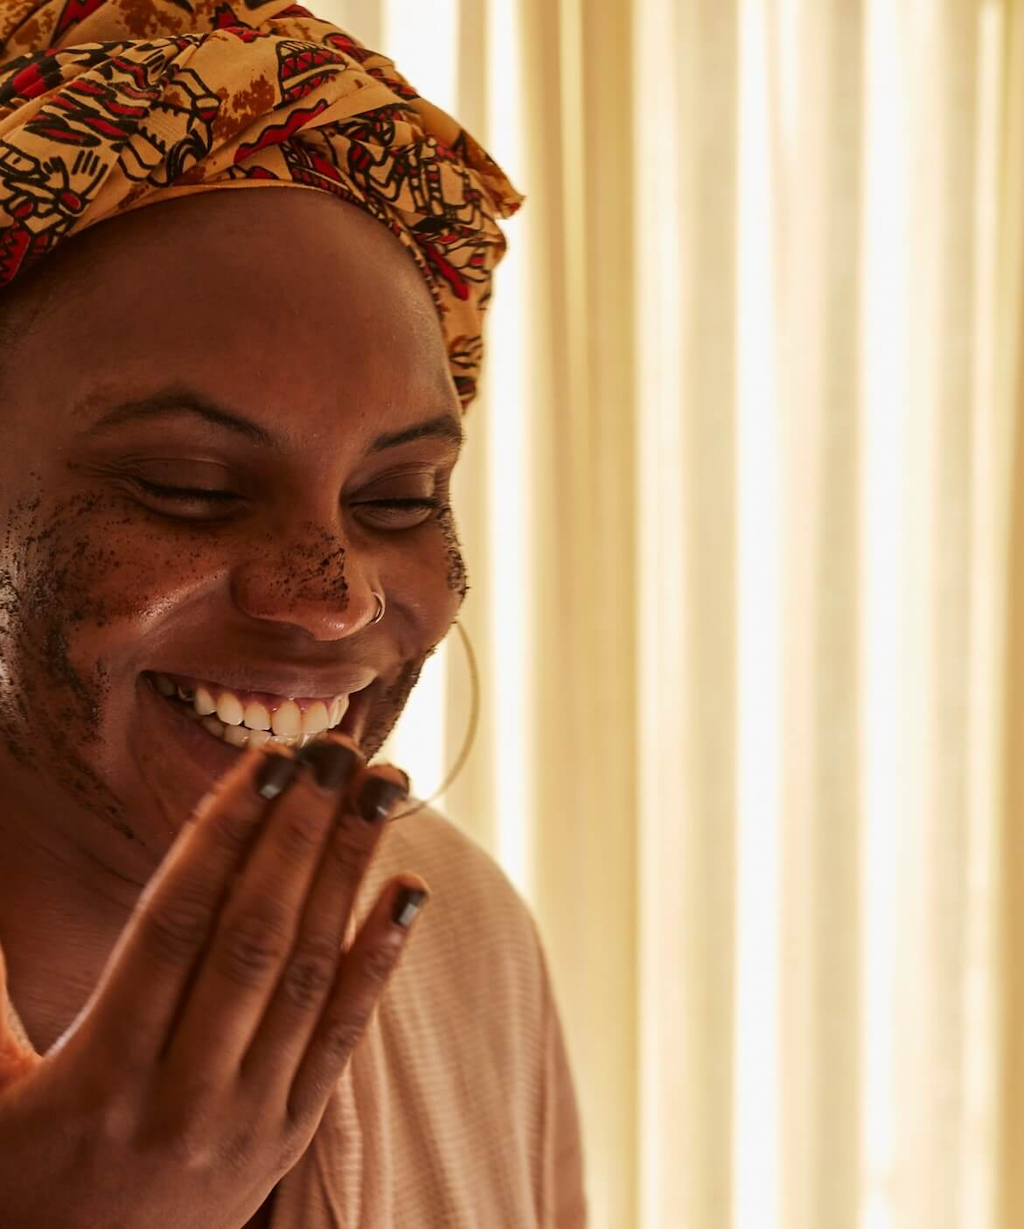 a black woman with an orange and red head scarf stands next to a window with light yellow curtains drawn. she is laughing and smiling as she applies the upcircle citrus and upcycled coffee grounds face scrub to her face